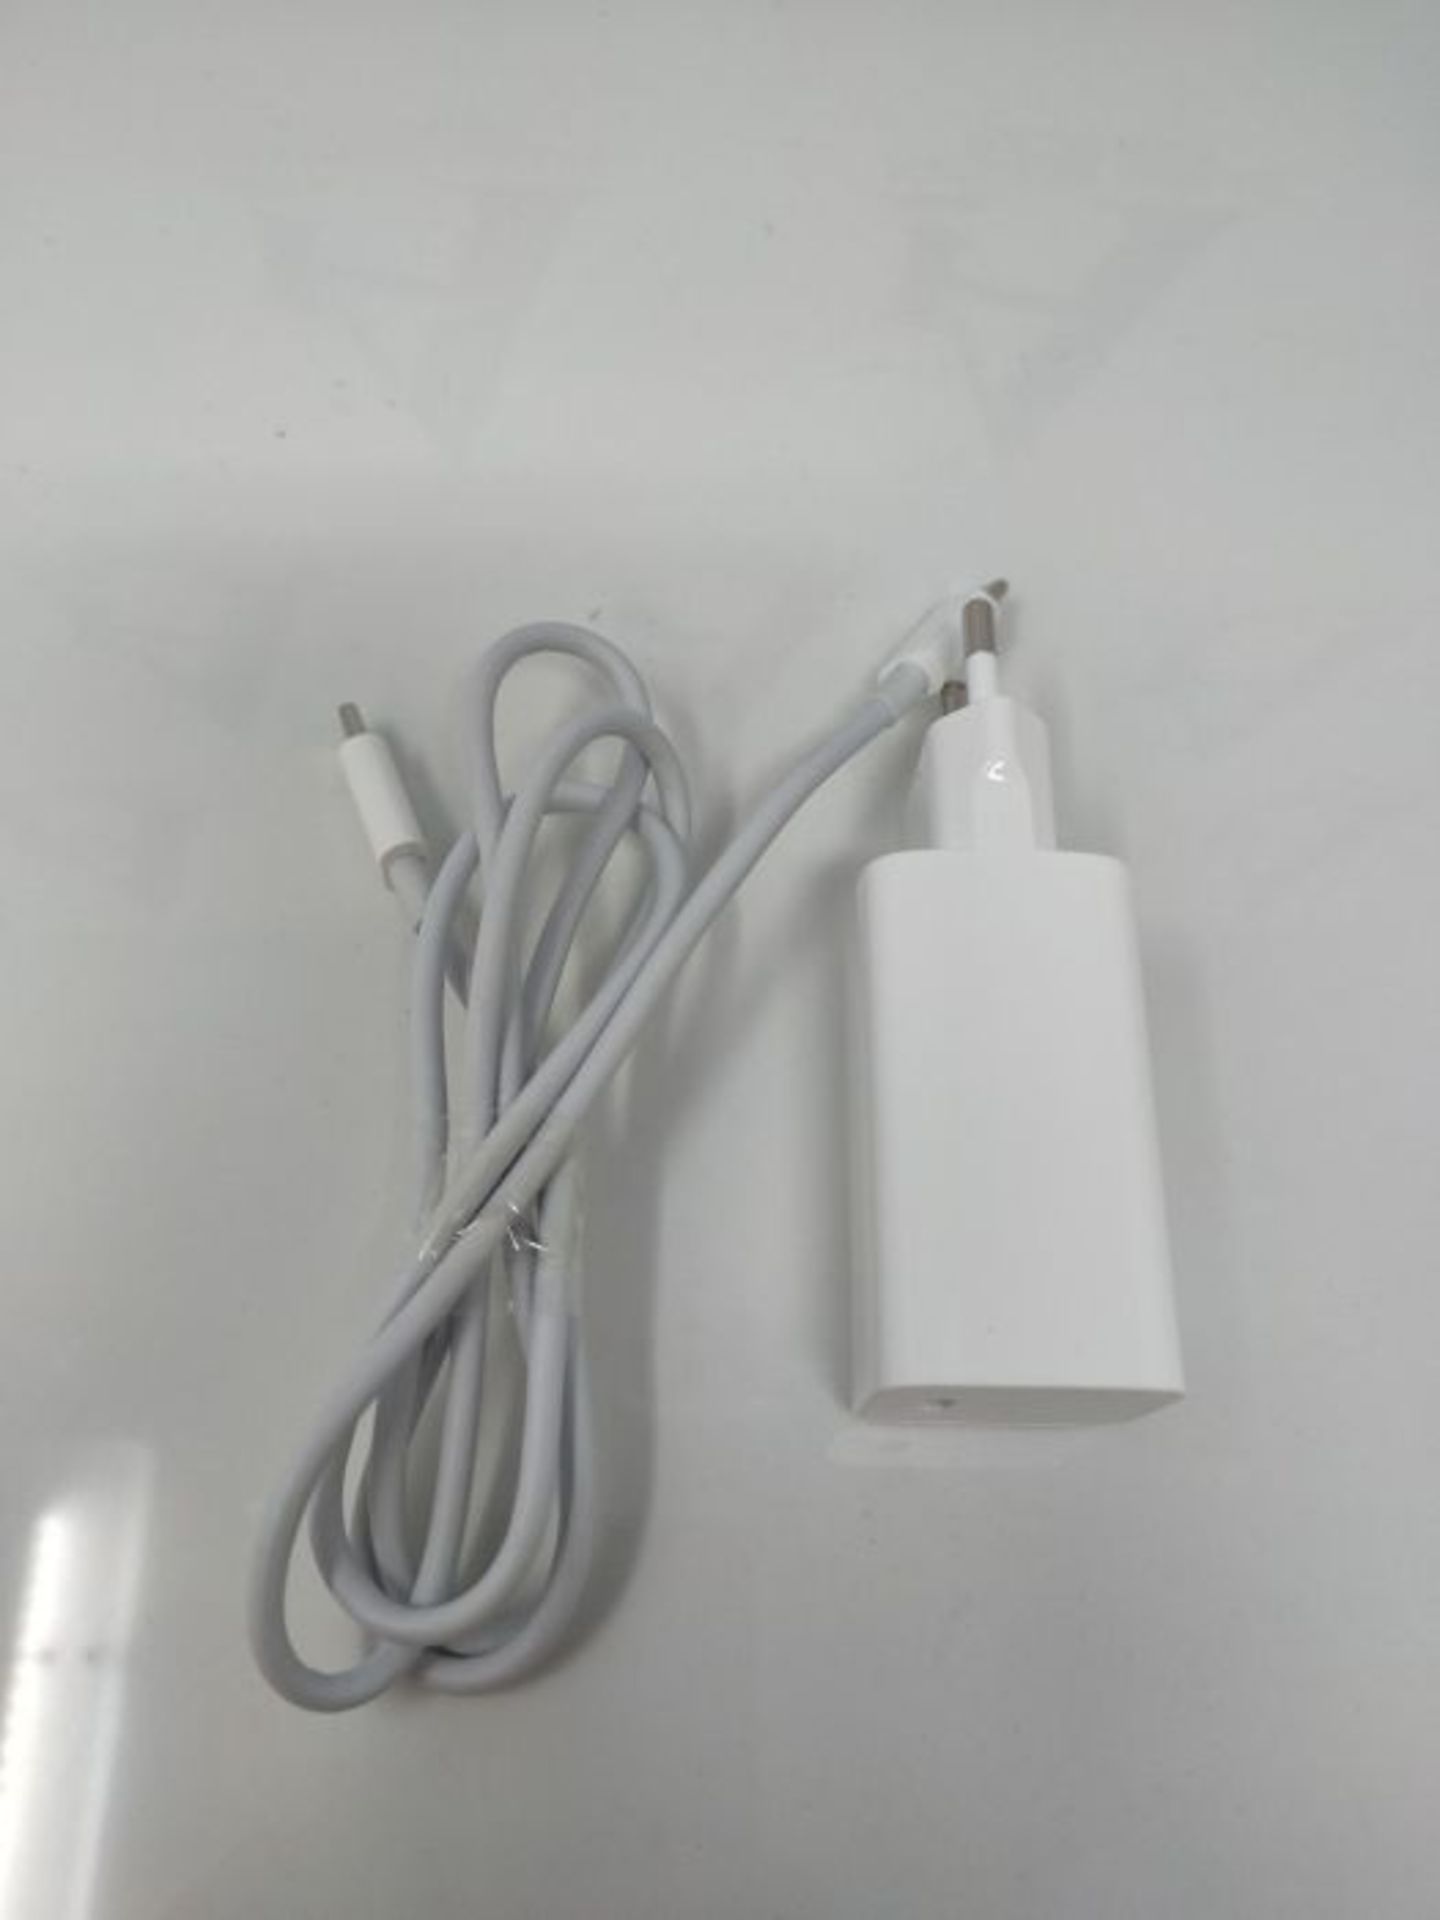 Xiaomi Mi 65W Fast Charger with GaN Tech, Charger for Smartphones and Notebooks, Compa - Image 2 of 2